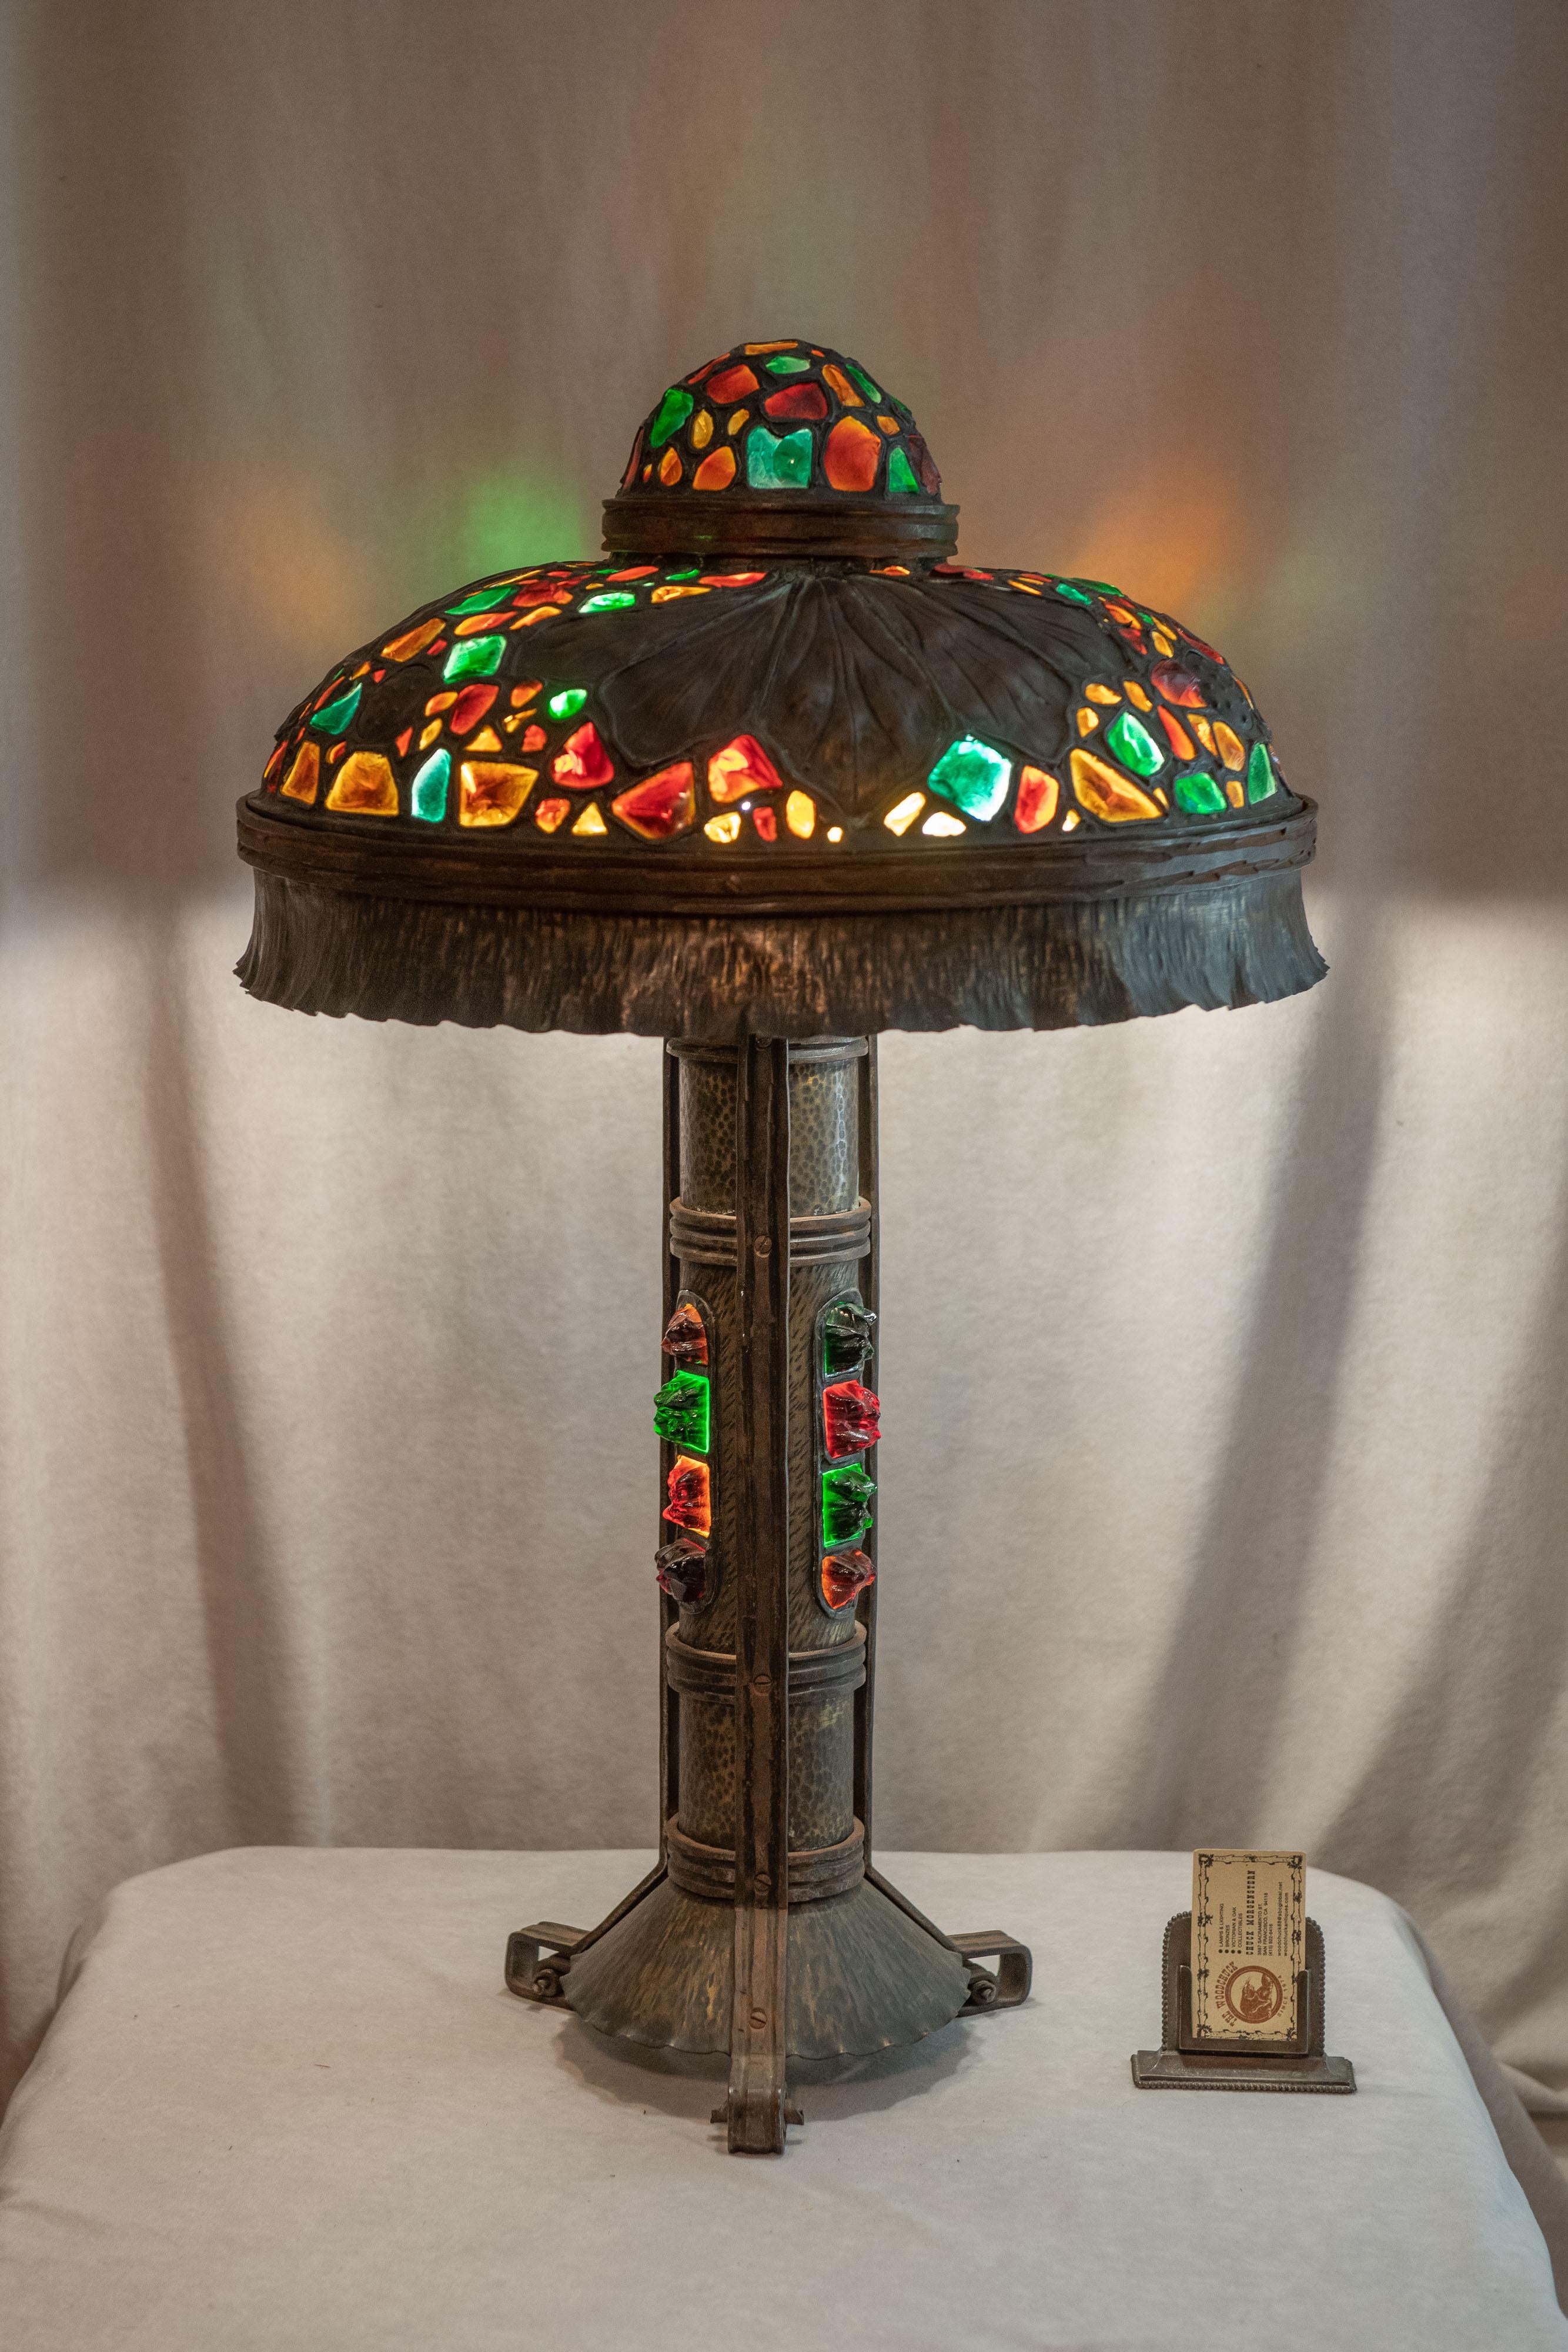 We have sold many Austrian table lamps with chunk jewel glass, but this may well be the best we have ever offered. Besides the extra large size, the design, the jeweled base, and the hammered metal work, it's most striking and colorful. The top of